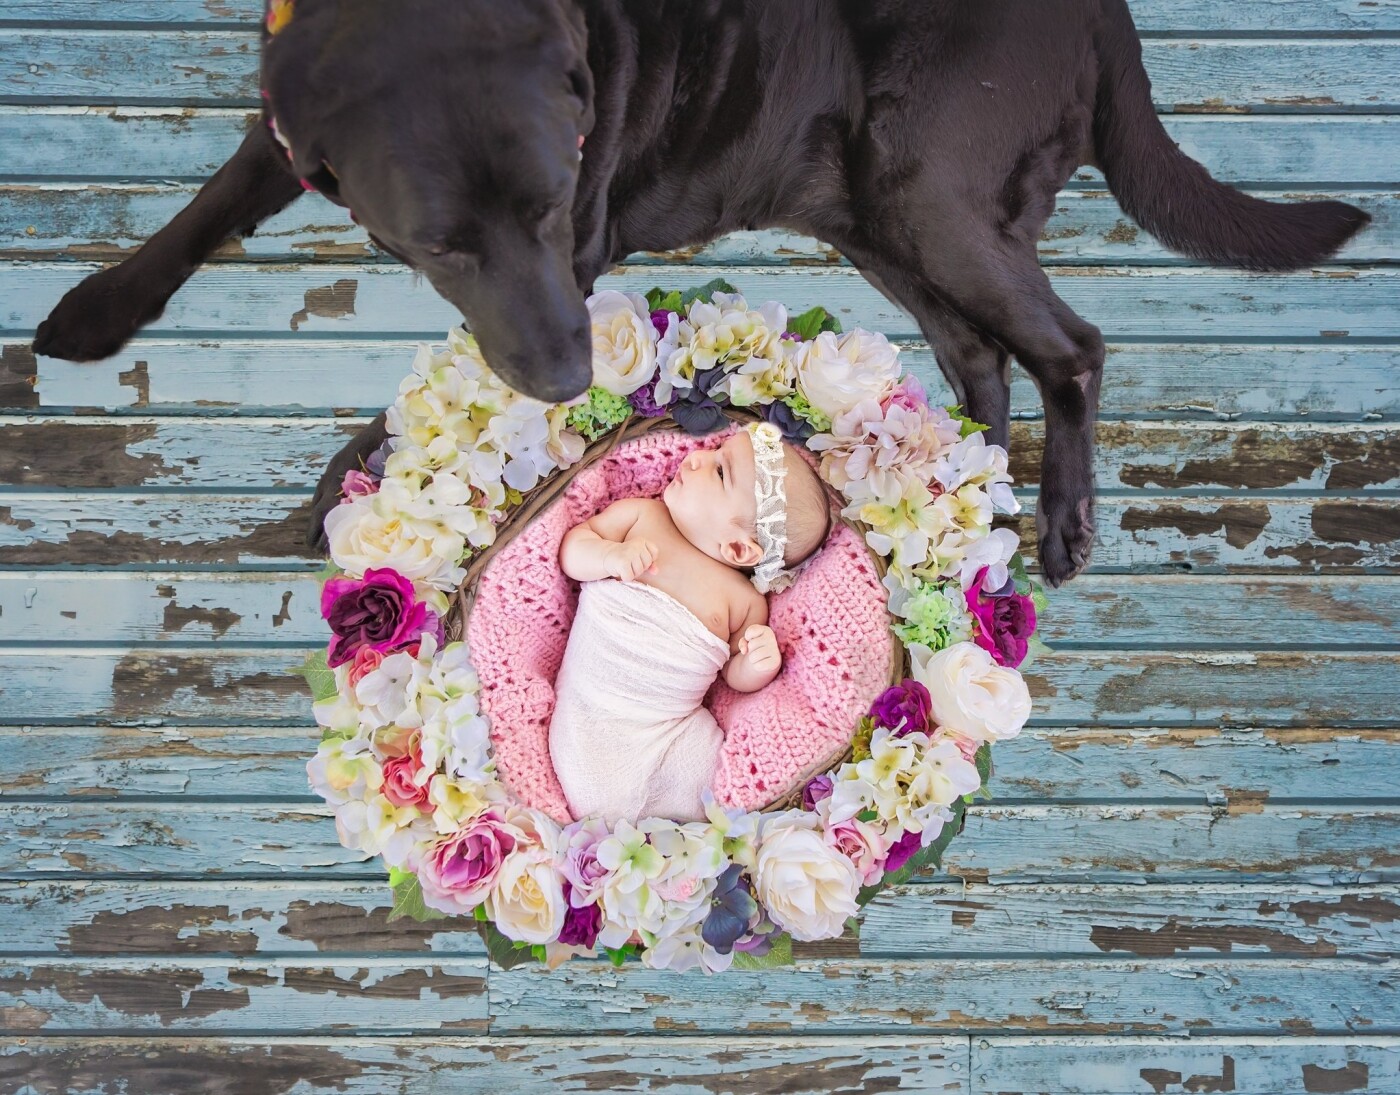 Meet Devon Simone and her best bud Remy ( Remy Martin).  I was so excited to use this wreath and to work with such a darling 6 week old girl! Devon Simone was so curious of her surroundings. 